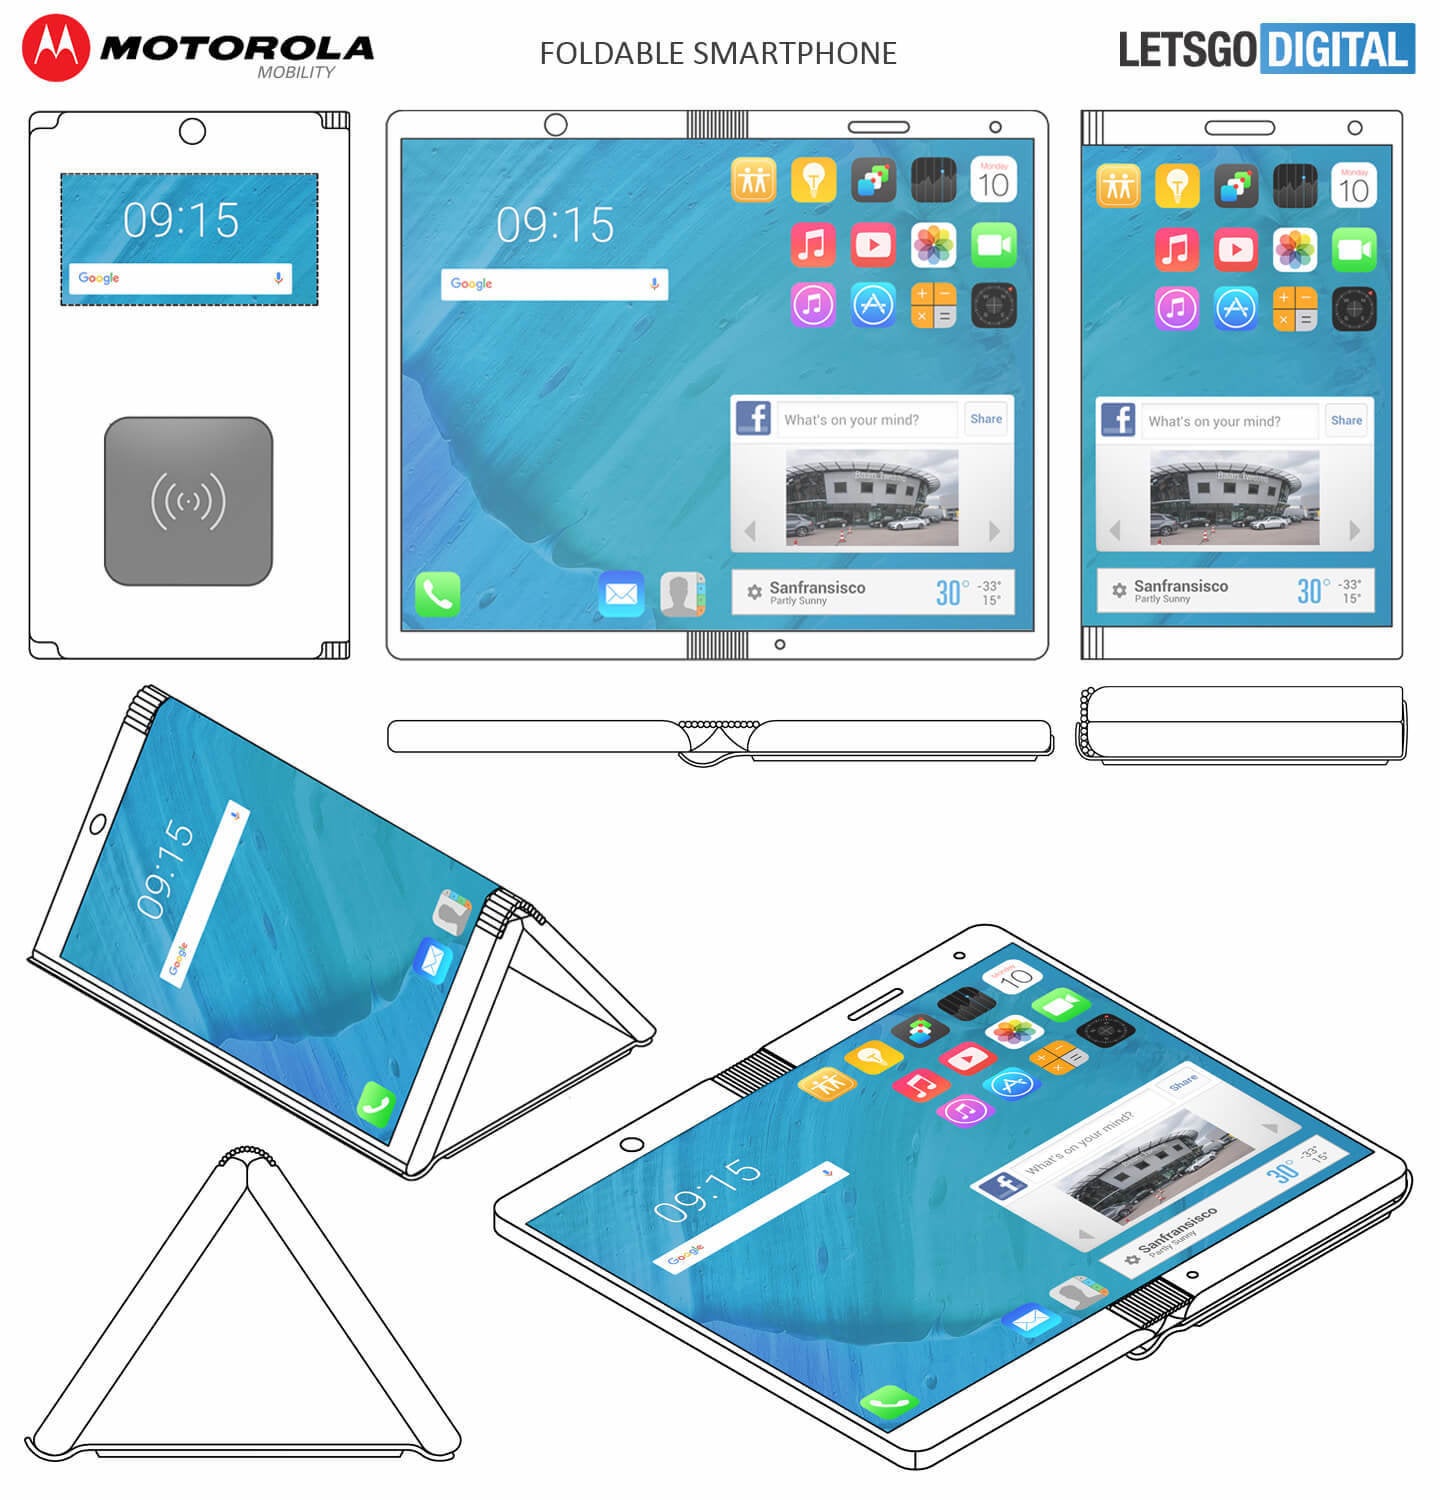 Motorola's newest patent is a foldable smartphone that turns into a tablet